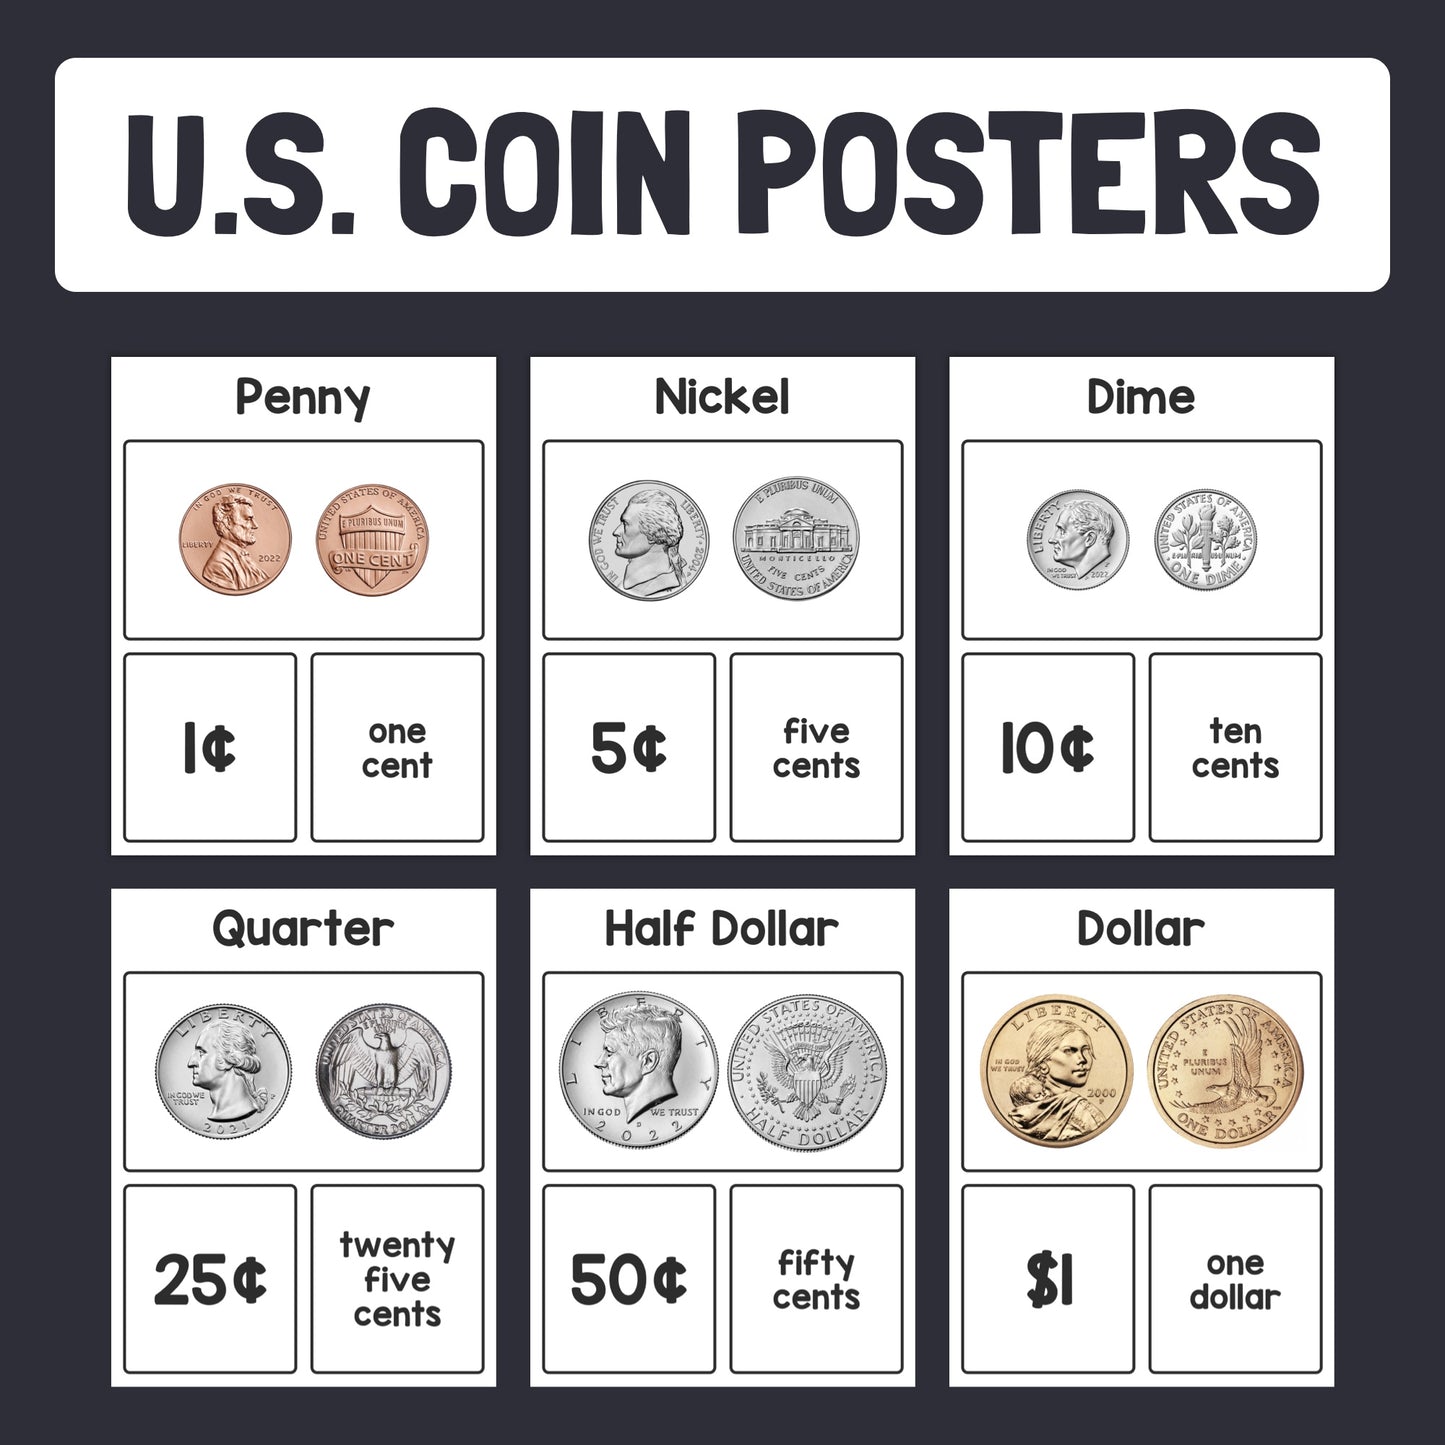 U.S. Coin Posters